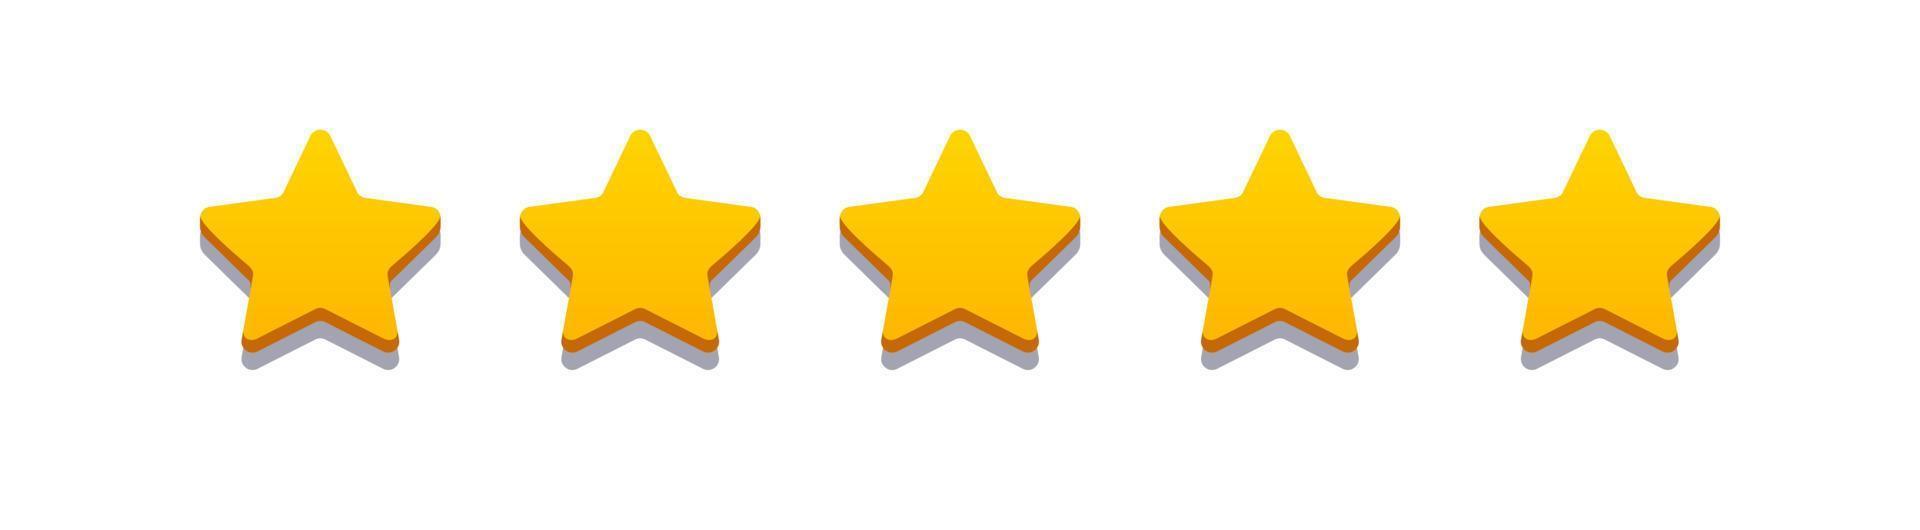 Rating stars gold realistic style for feedback vector